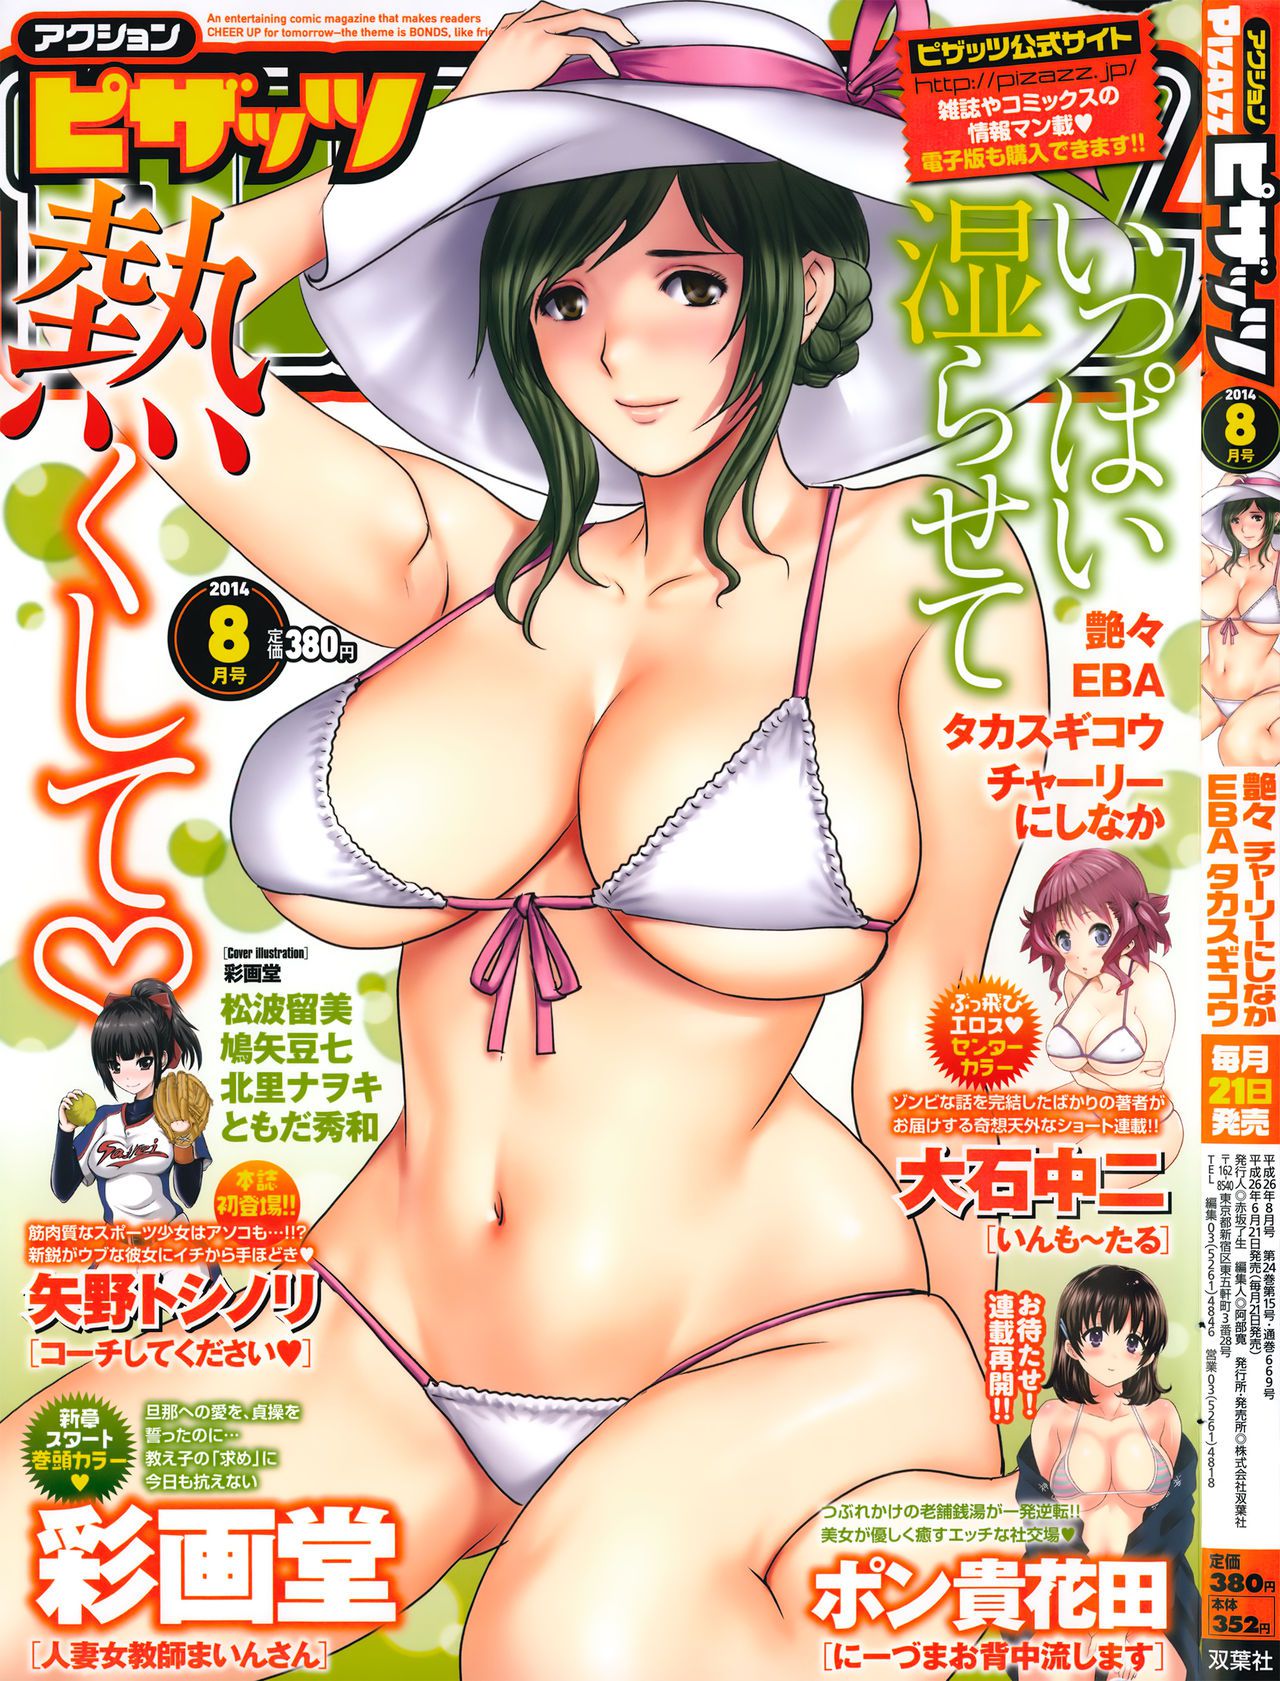 [Saigado] Cover Illustrations [彩画堂] Cover Illustrations 78